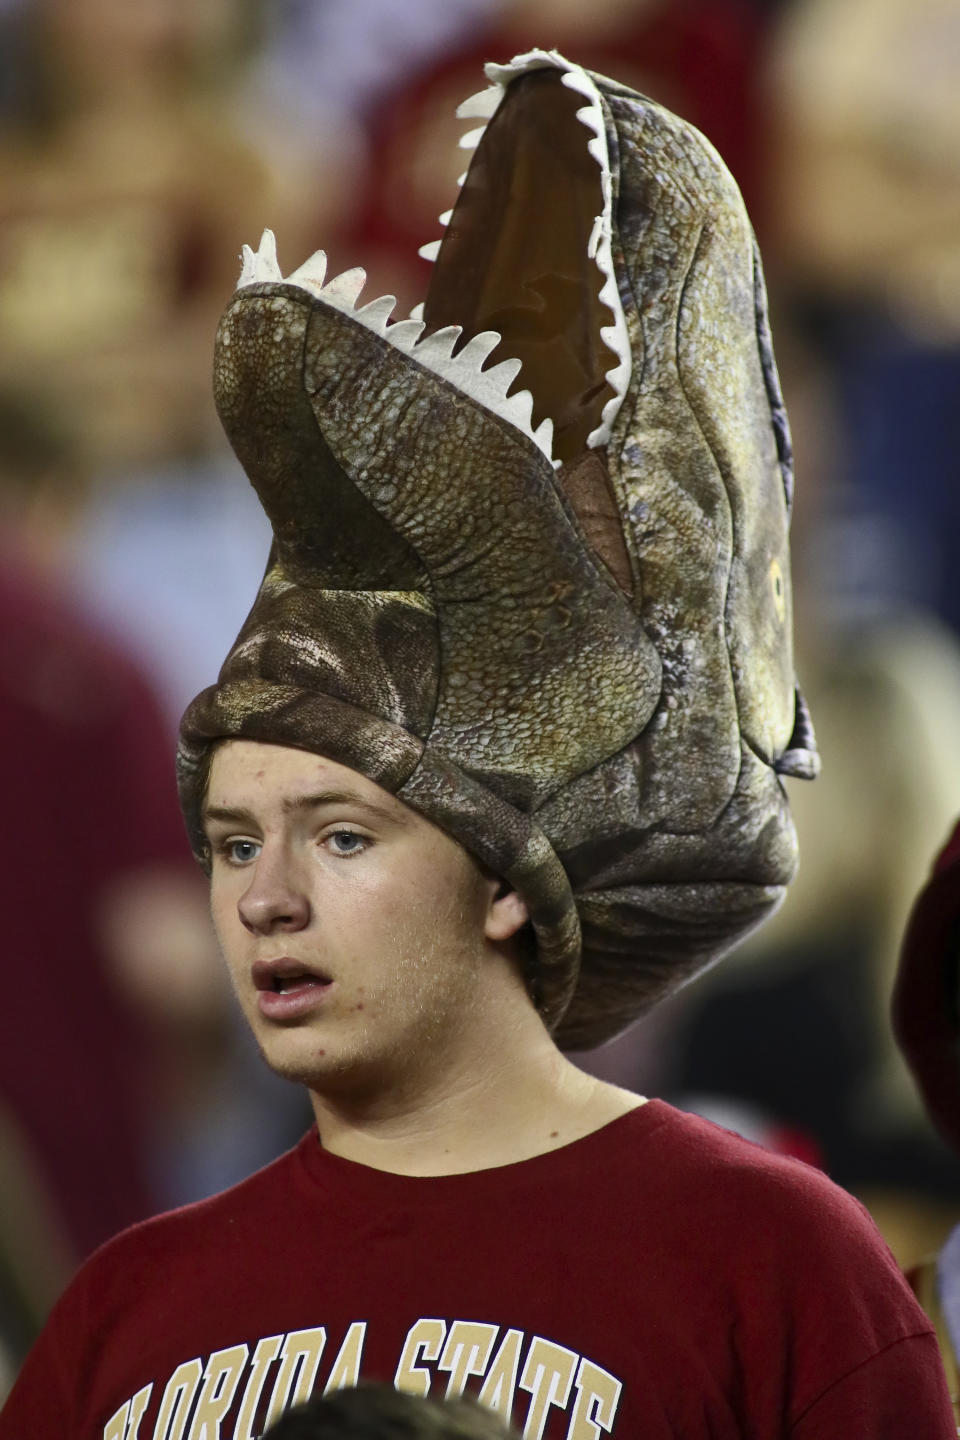 A Florida State fan looks on before an NCAA college football game against Florida, Friday, Nov. 25, 2022, in Tallahassee, Fla. (AP Photo/Phil Sears)